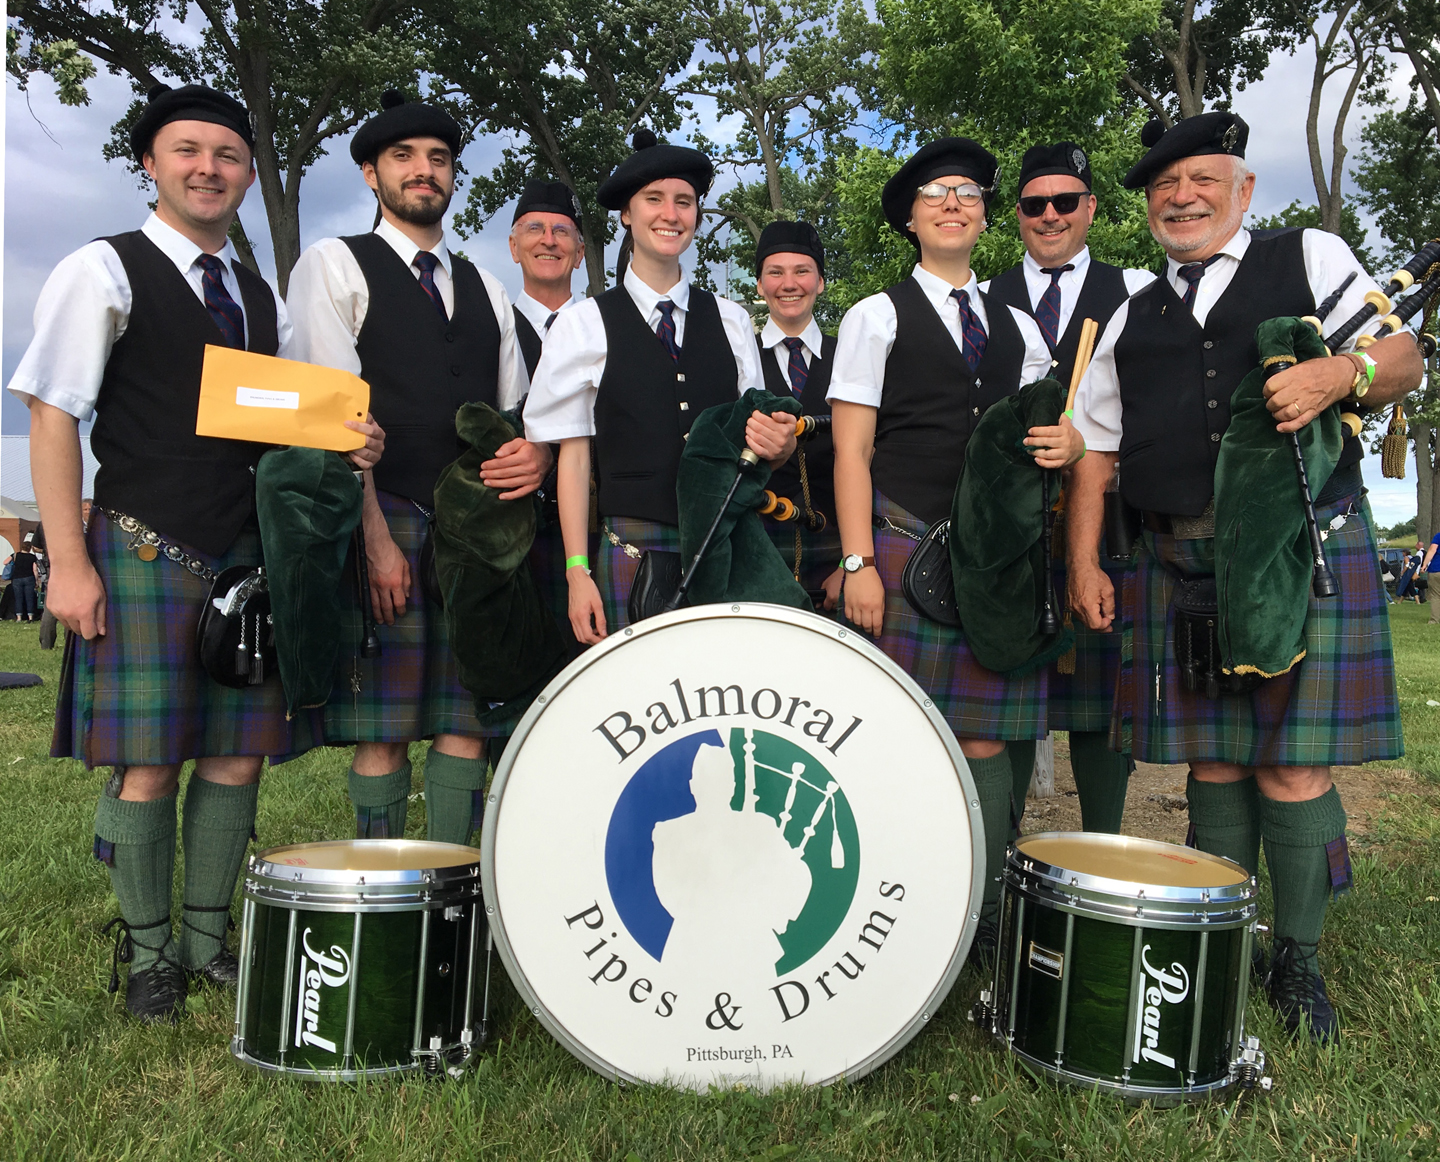 Balmoral Pipes & Drums win!